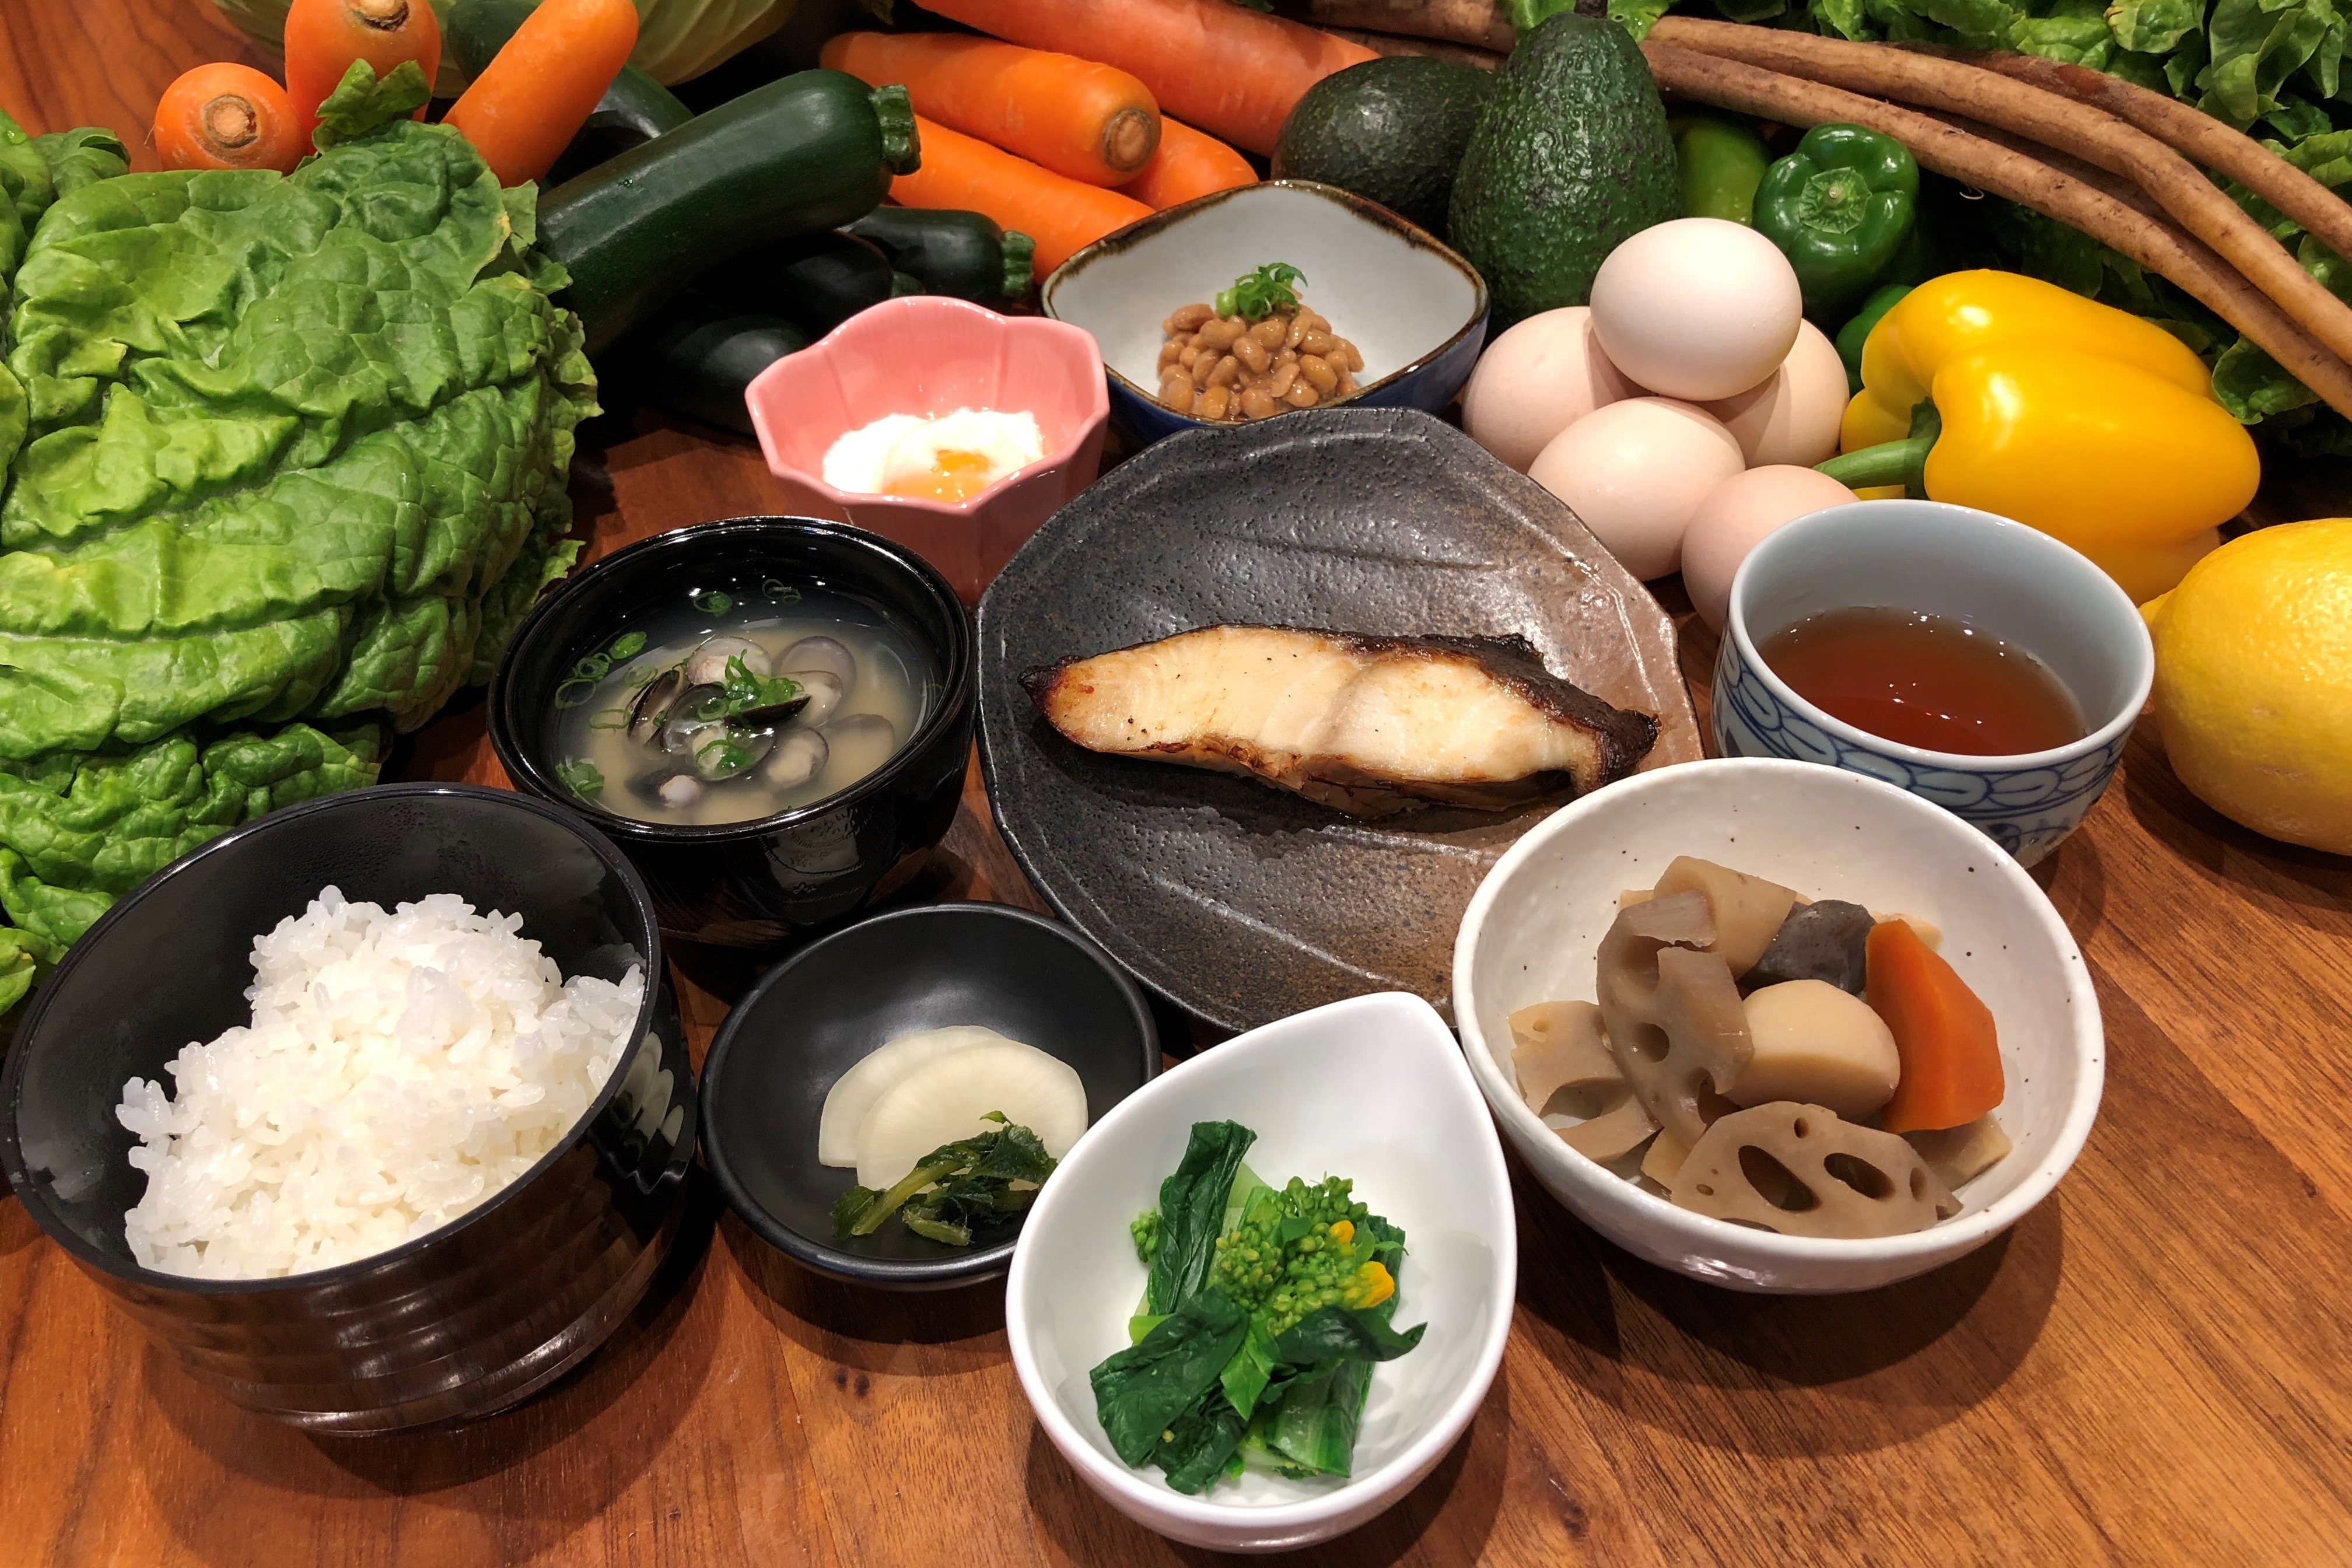 "Breakfast with a healthy Japanese set meal"